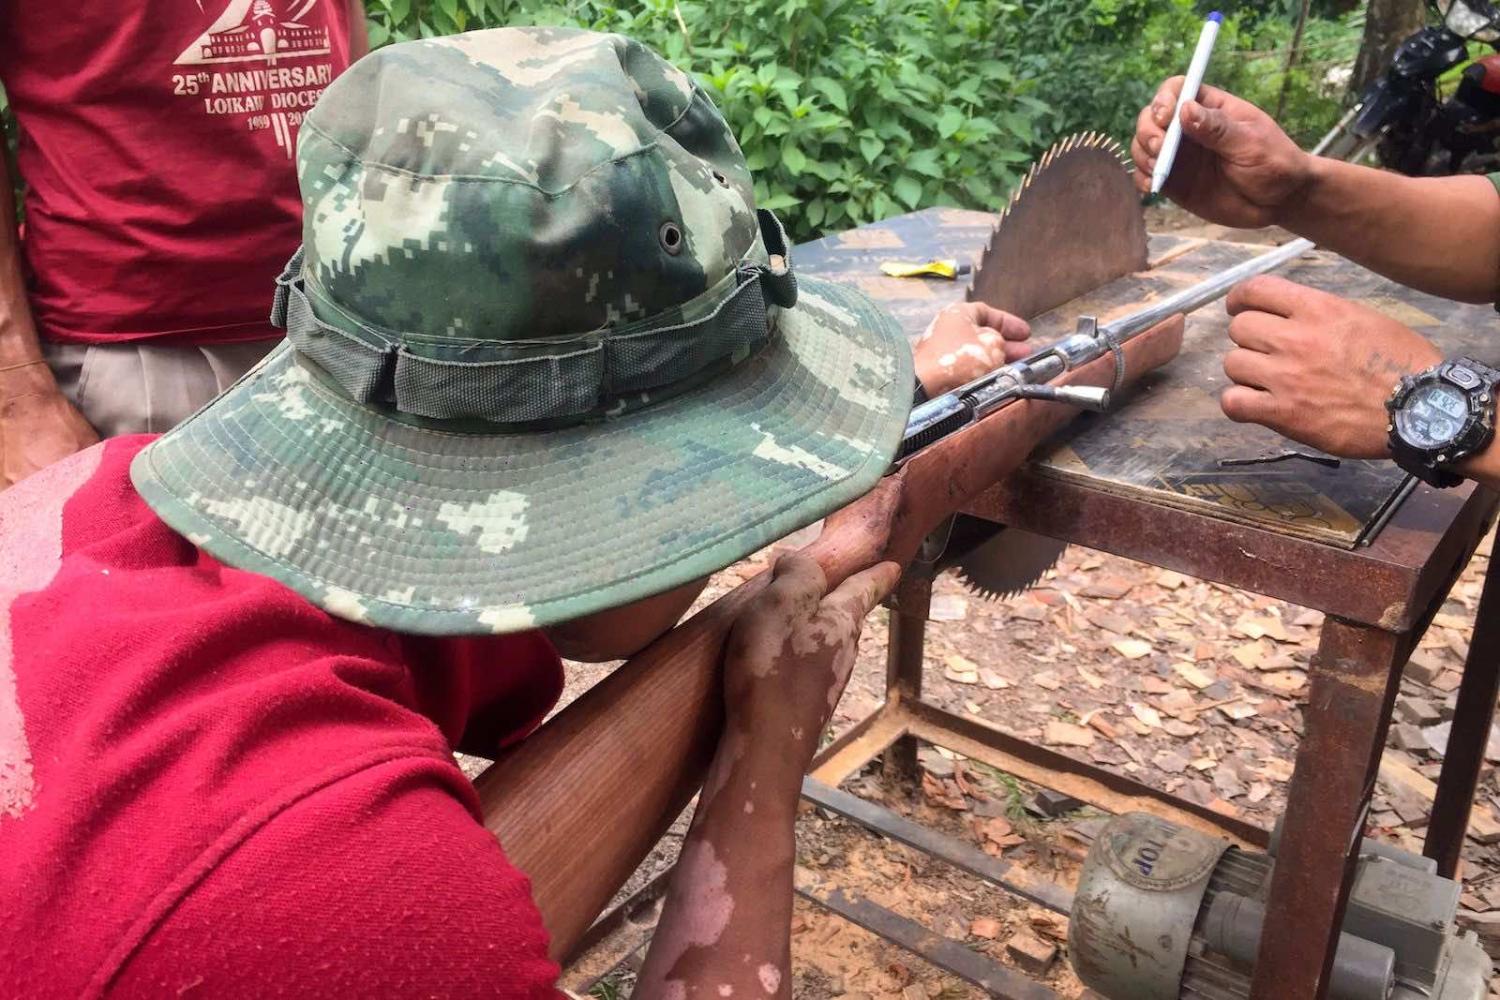 Handmade guns to be used in fighting against security forces, near Demoso, Kayah state, Myanamar, 4 June 2021 (STR/AFP via Getty Images)